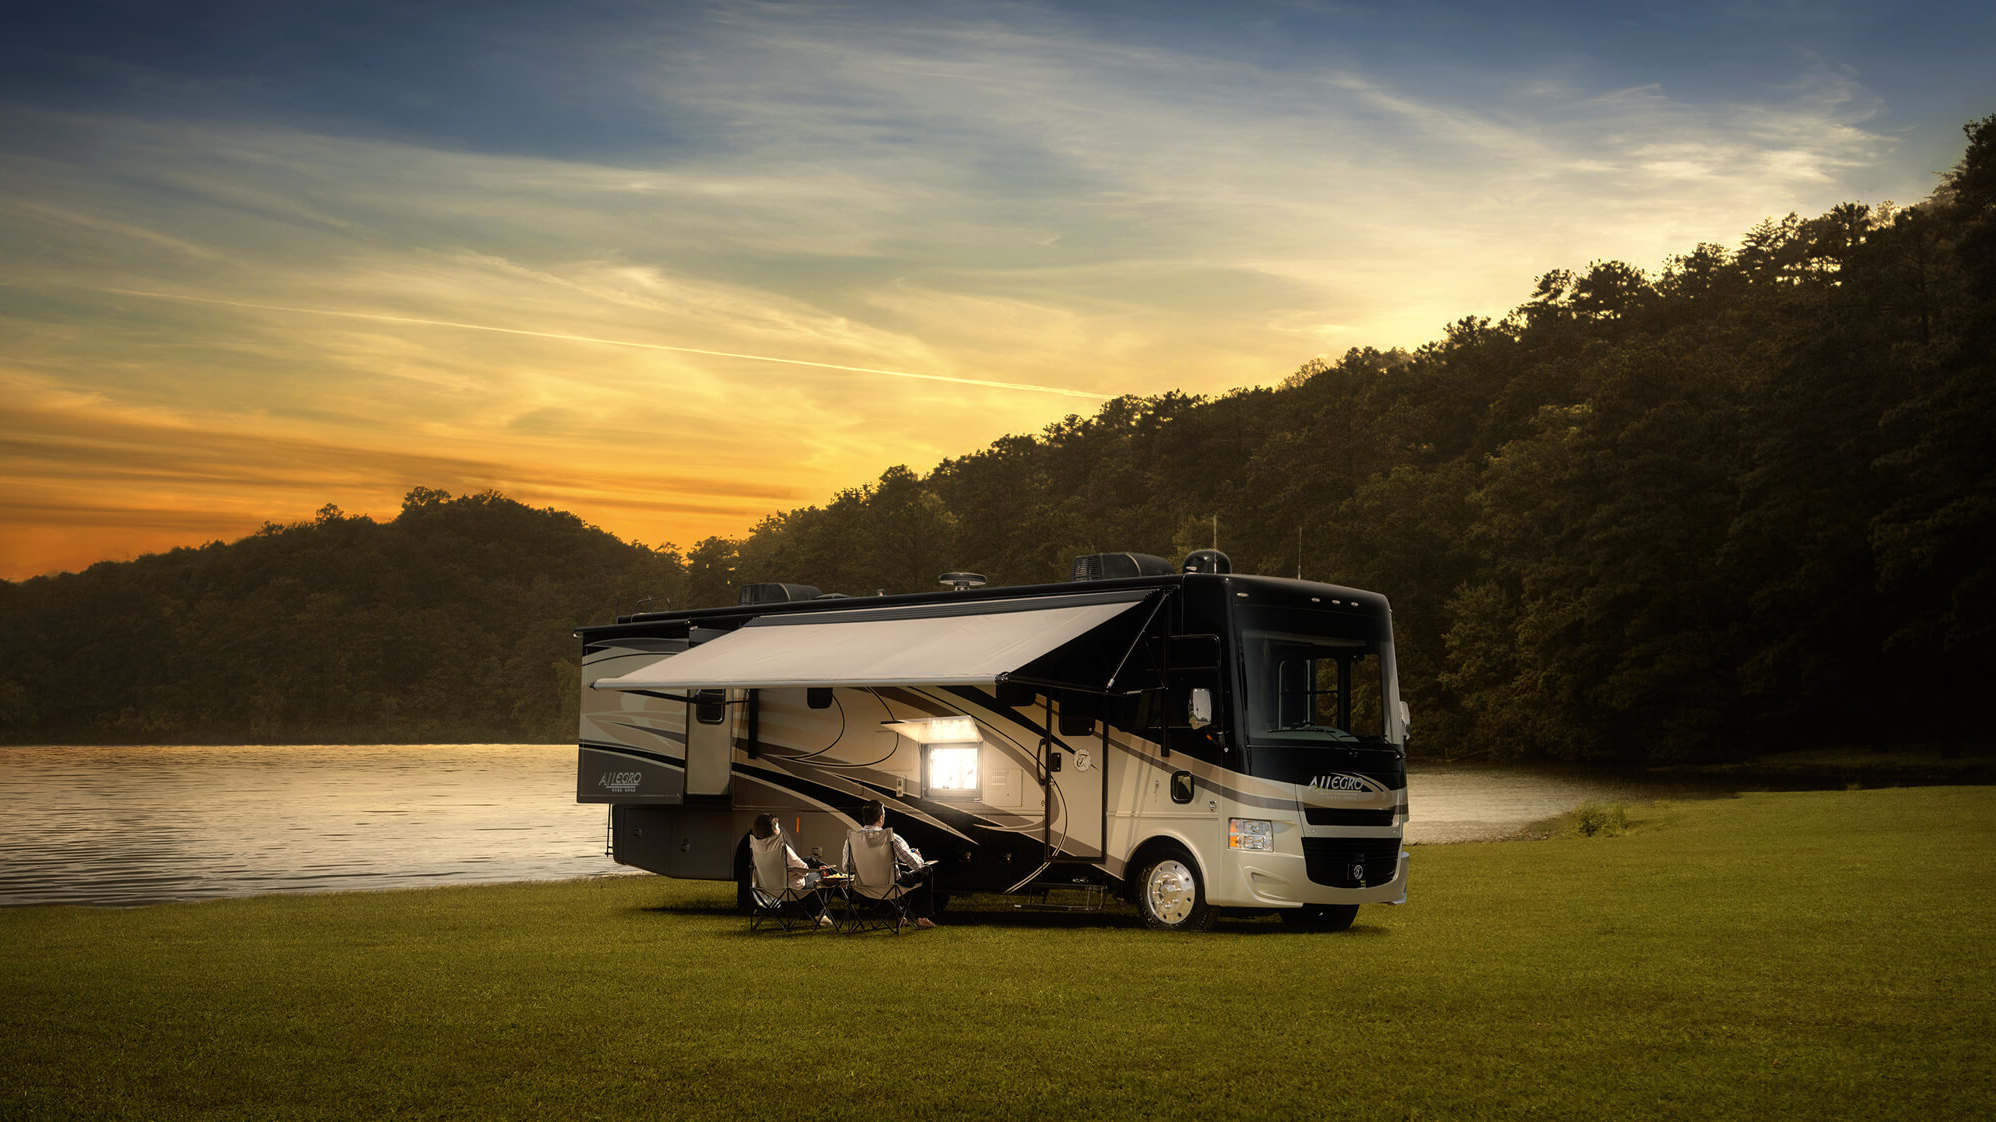 How to Install Satellite TV in Your RV